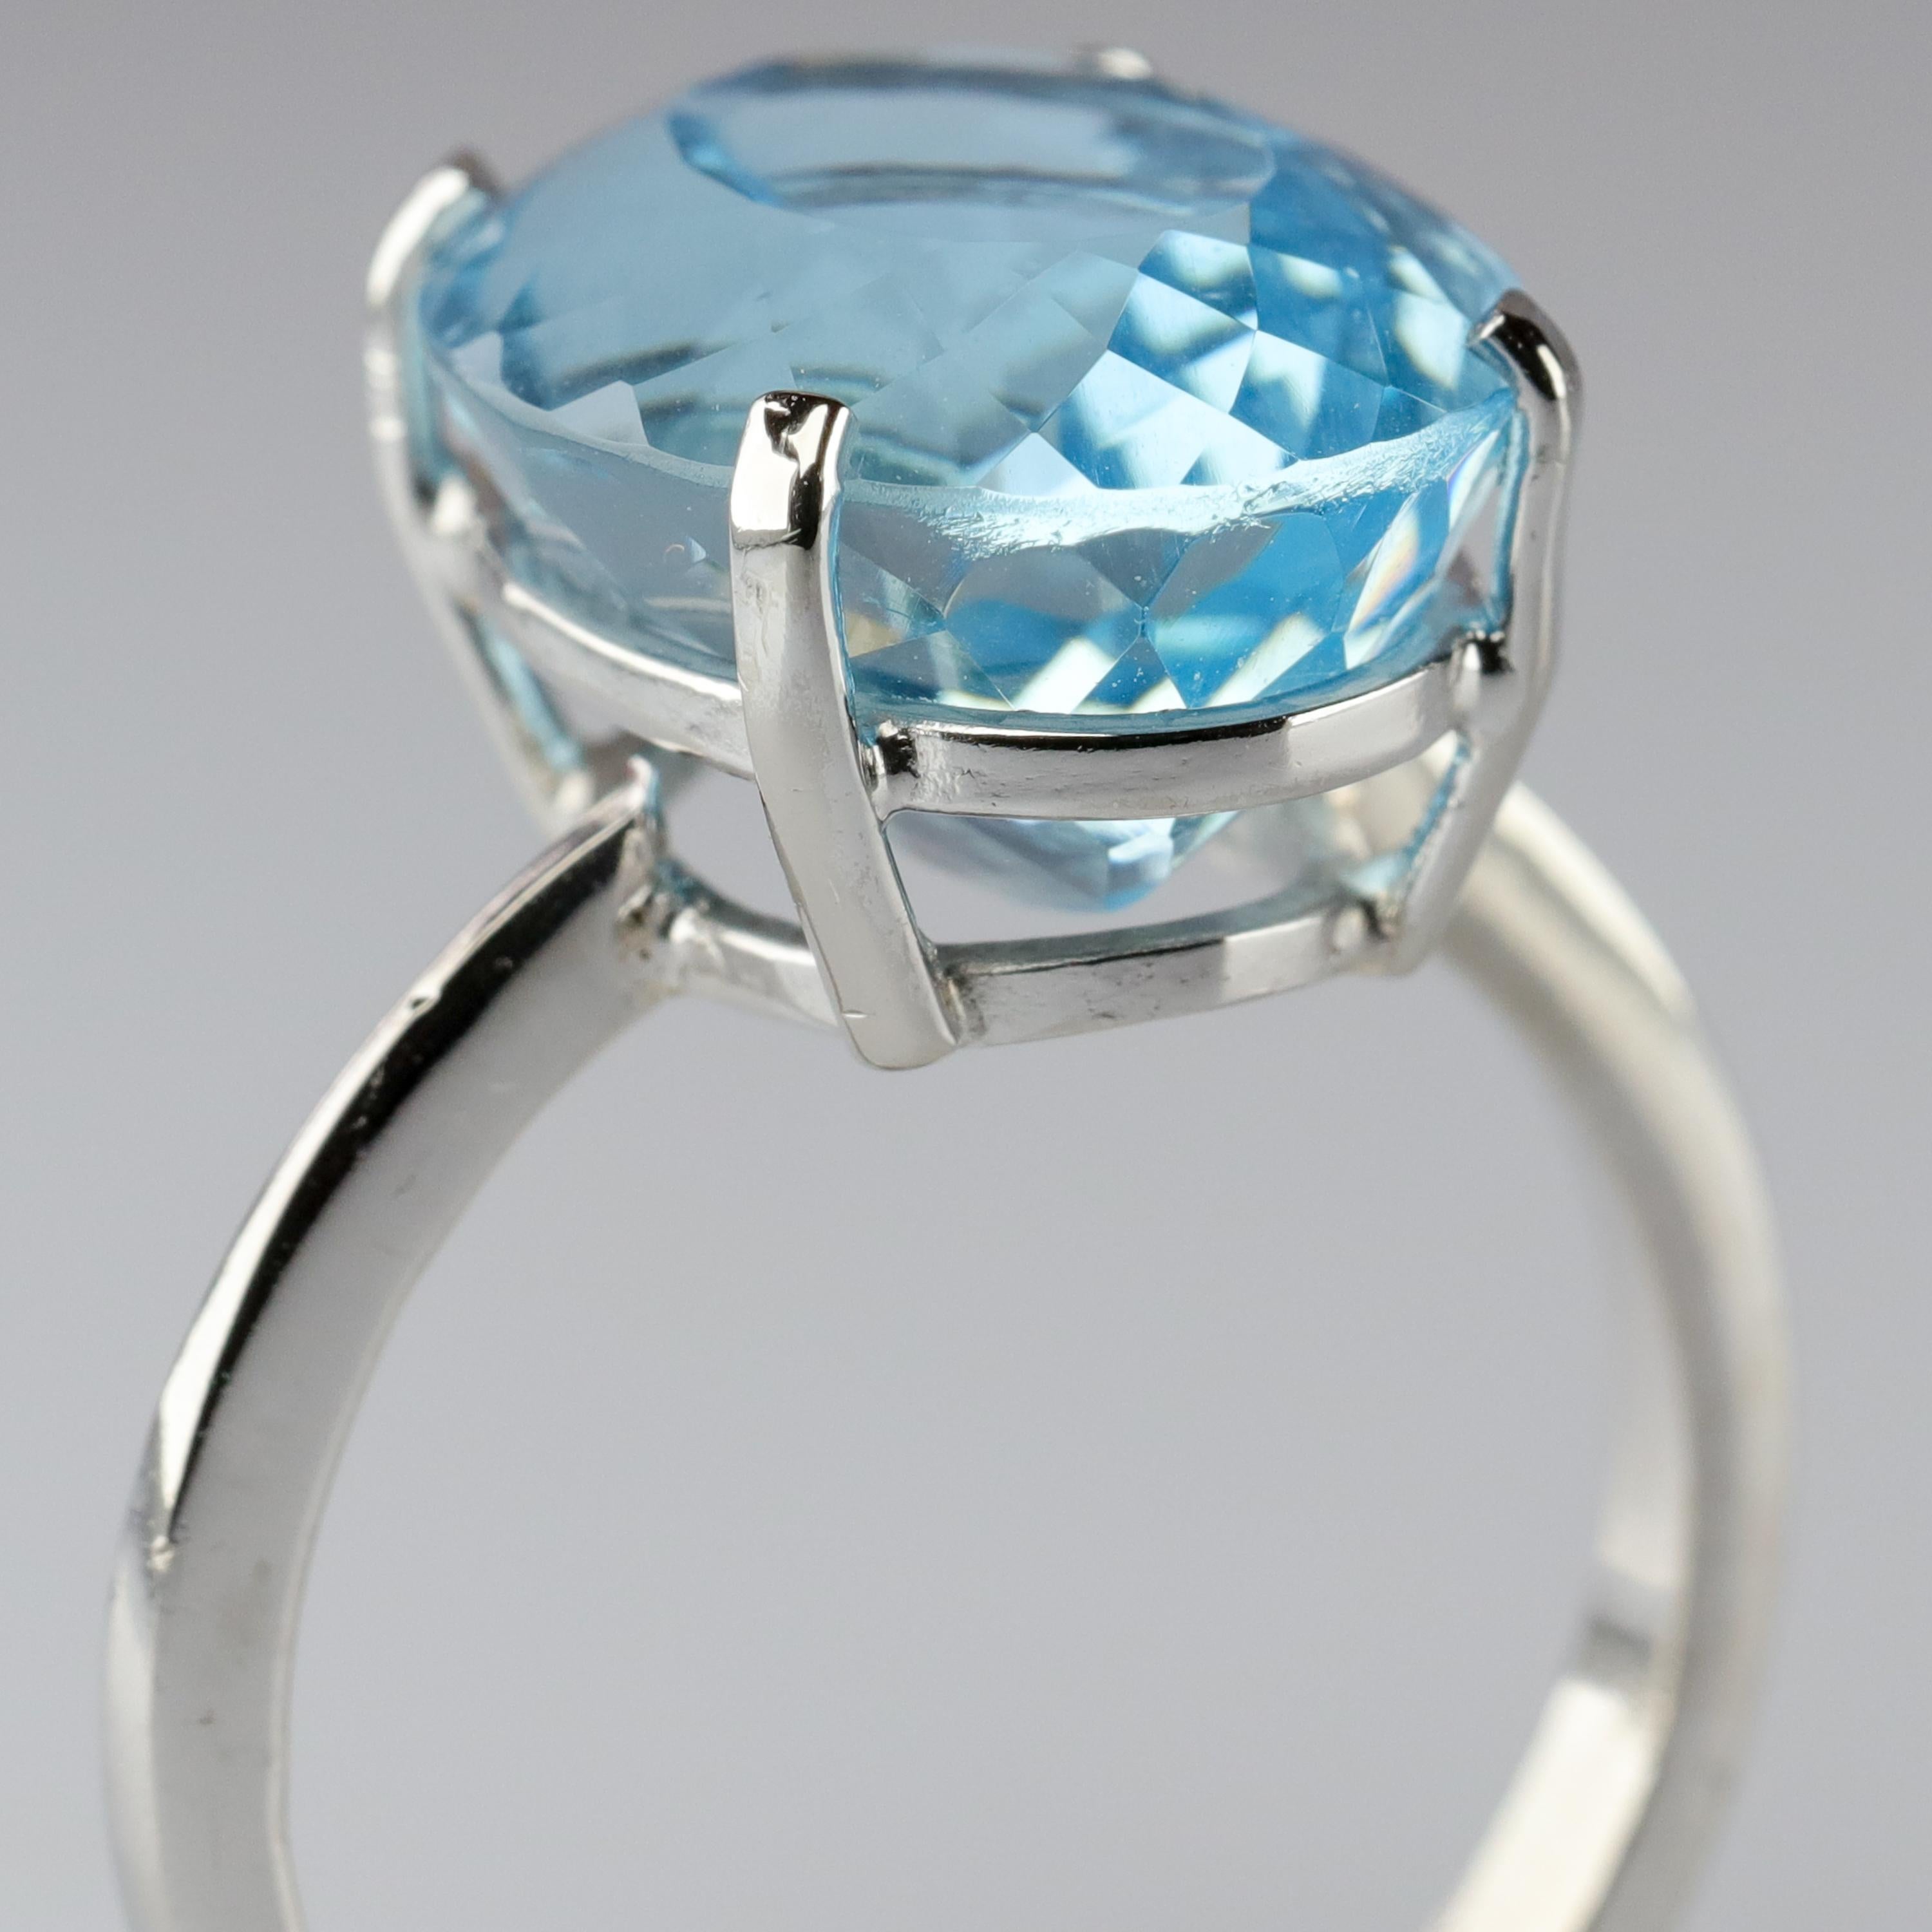 I have two issues with aquamarine rings. Issue number one is size. A ginormous 27-carat emerald-cut aquamarine might have made perfect sense in 1957 but today? How can you wear jeans and a ring with a stone that big? What I mean is, what happens if